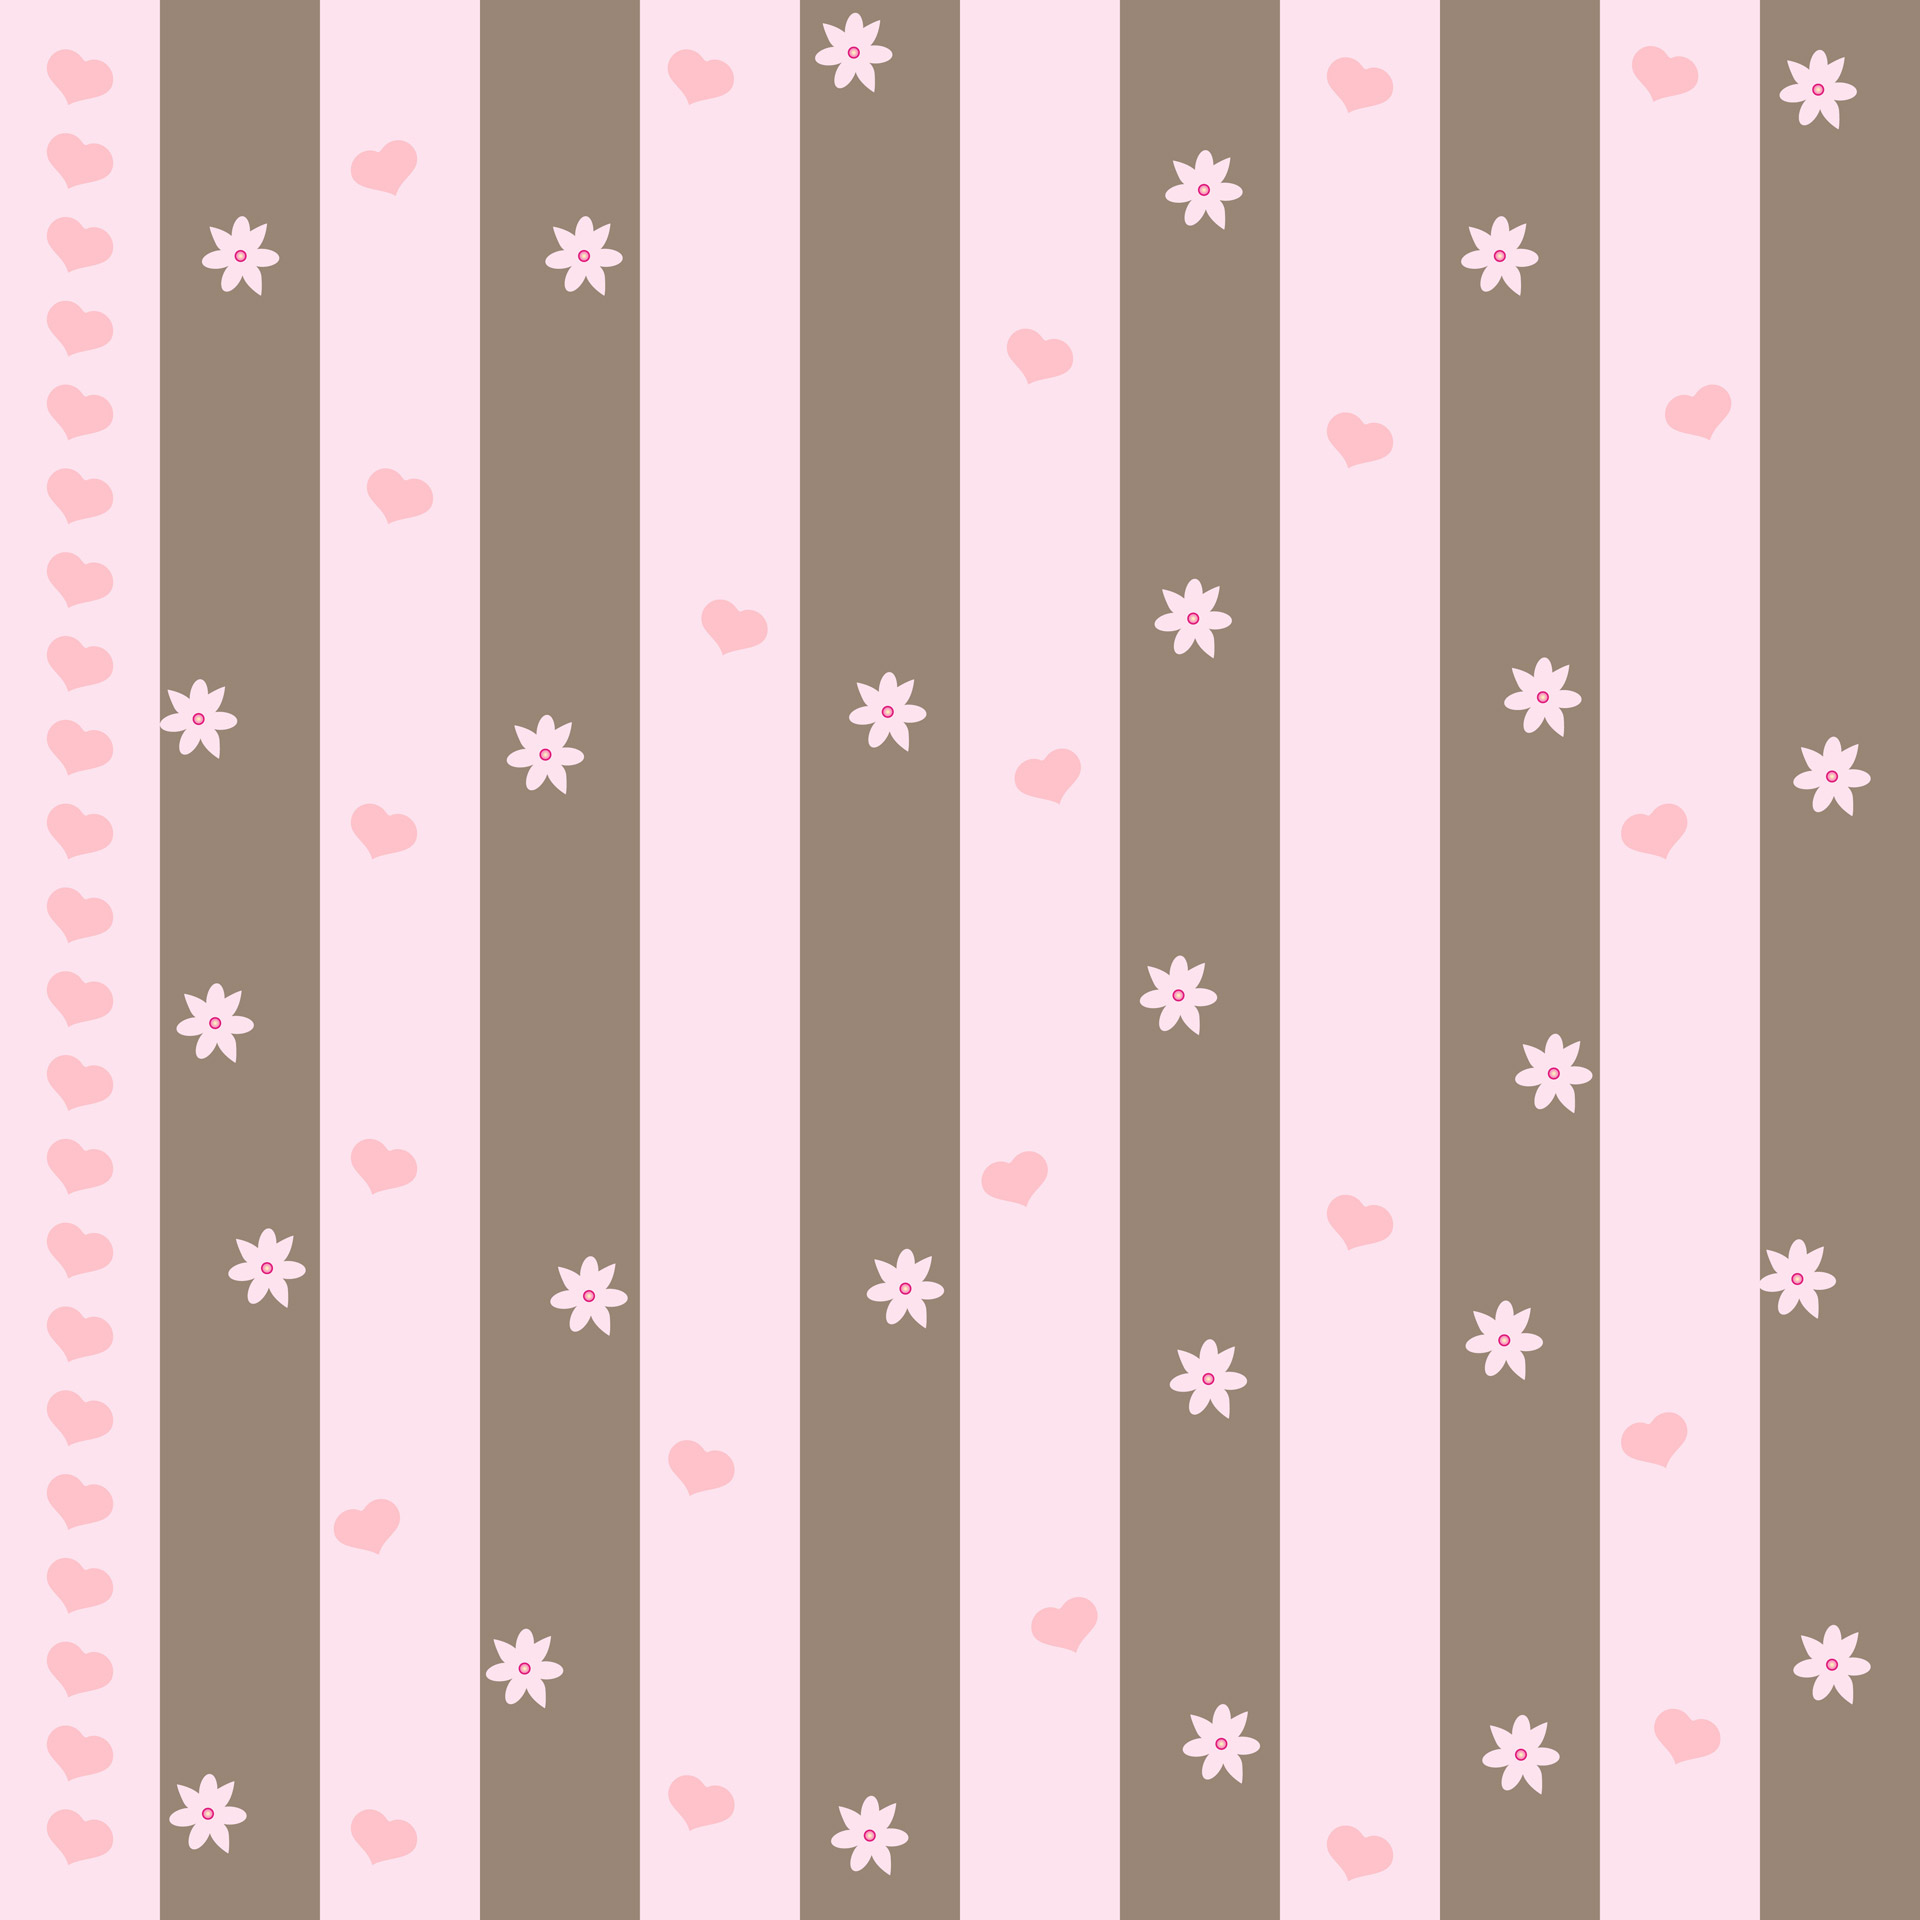 Hearts & Flowers Background